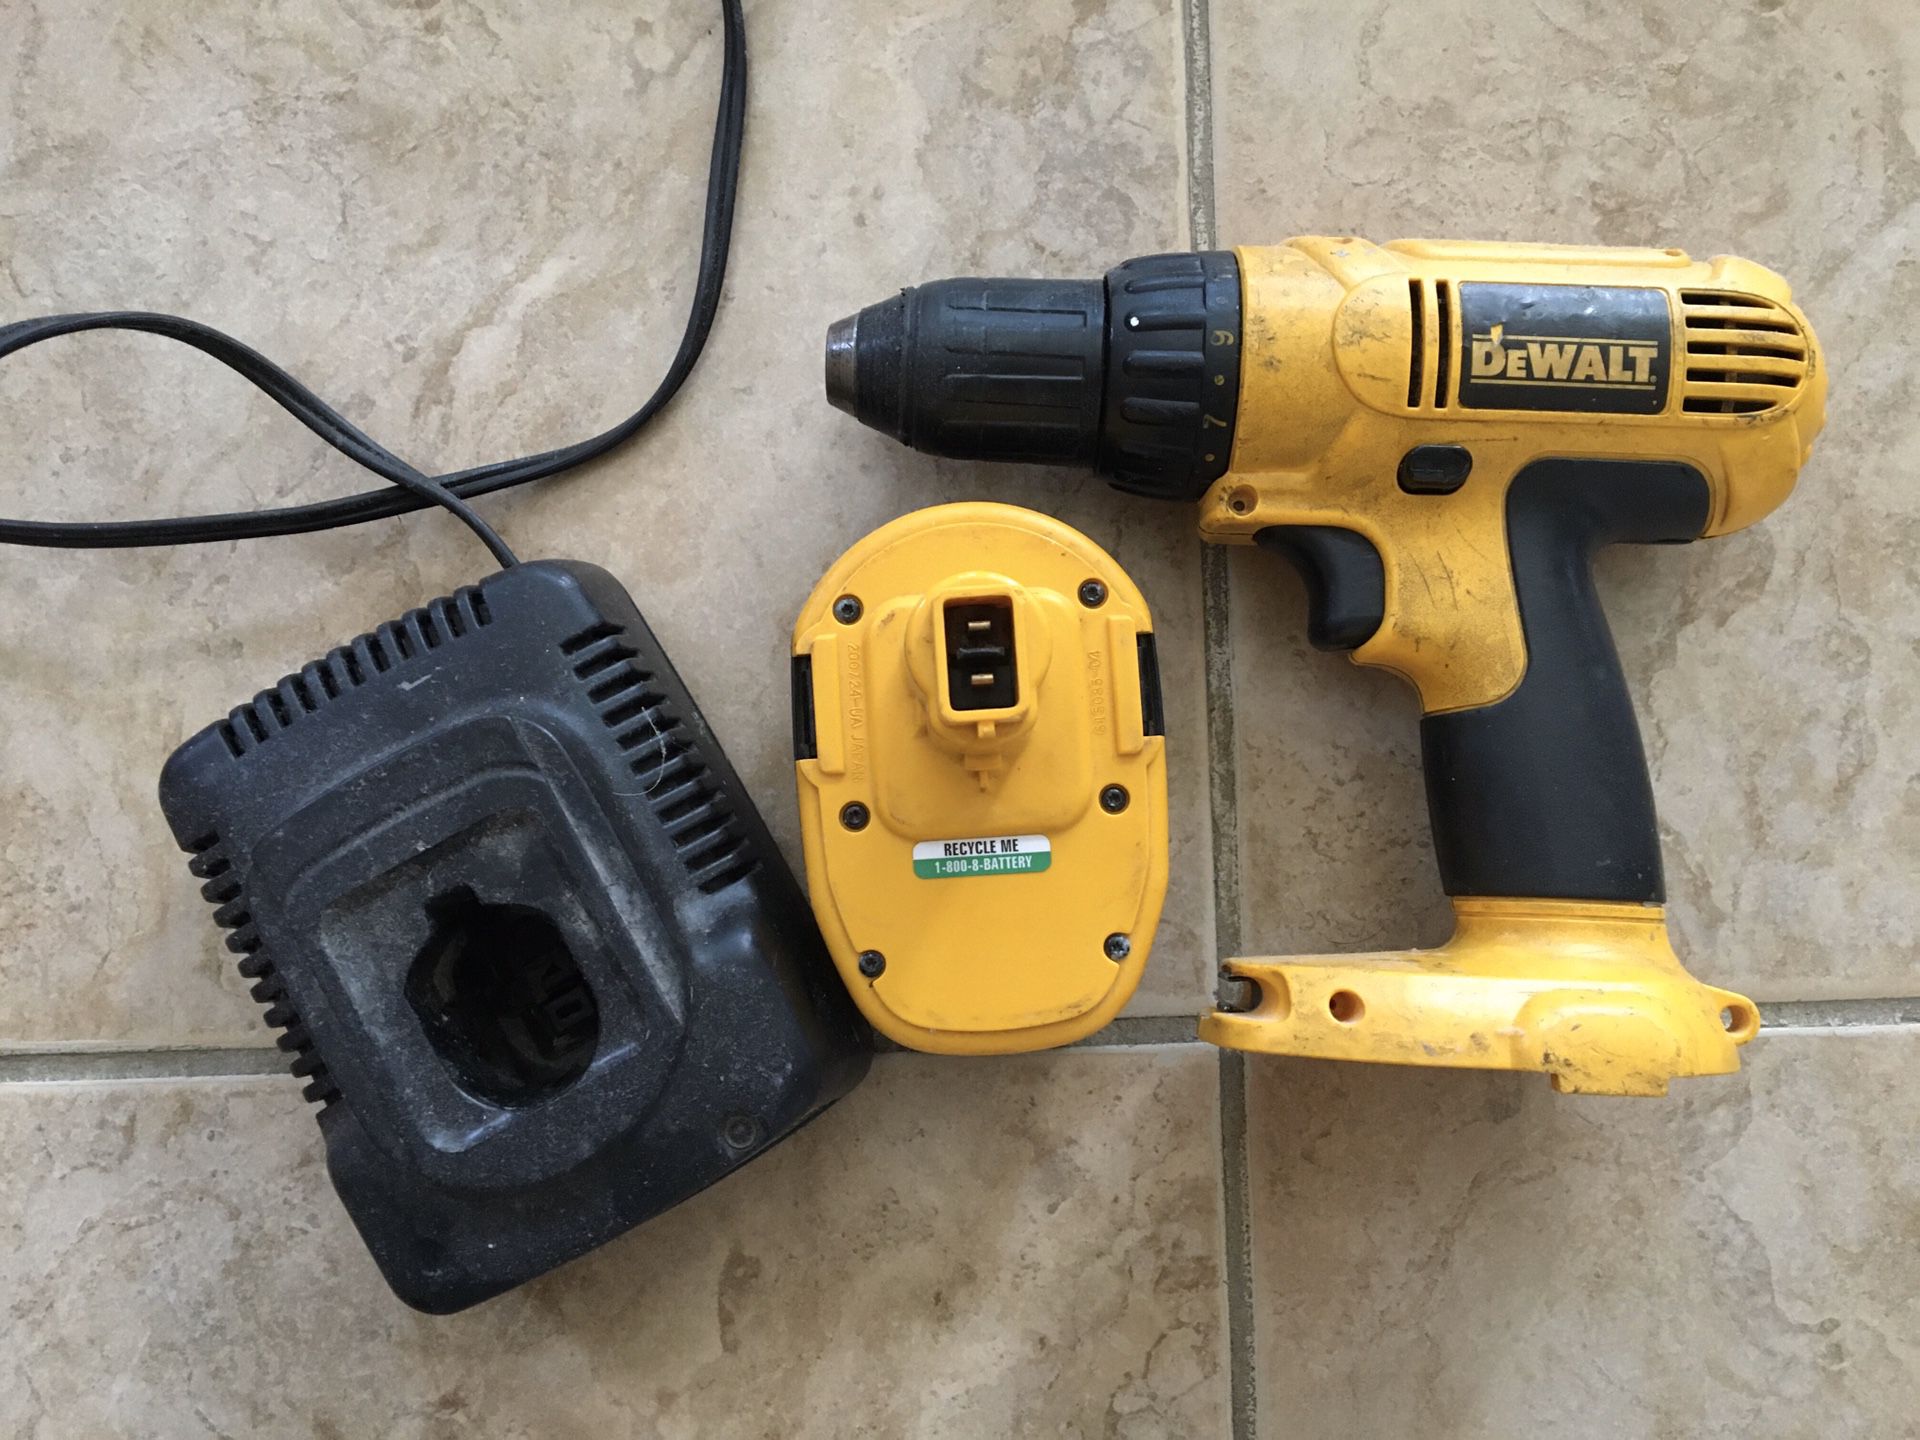 Dewalt 1/2" DC728 14.4 volt cordless drill driver battery and charger